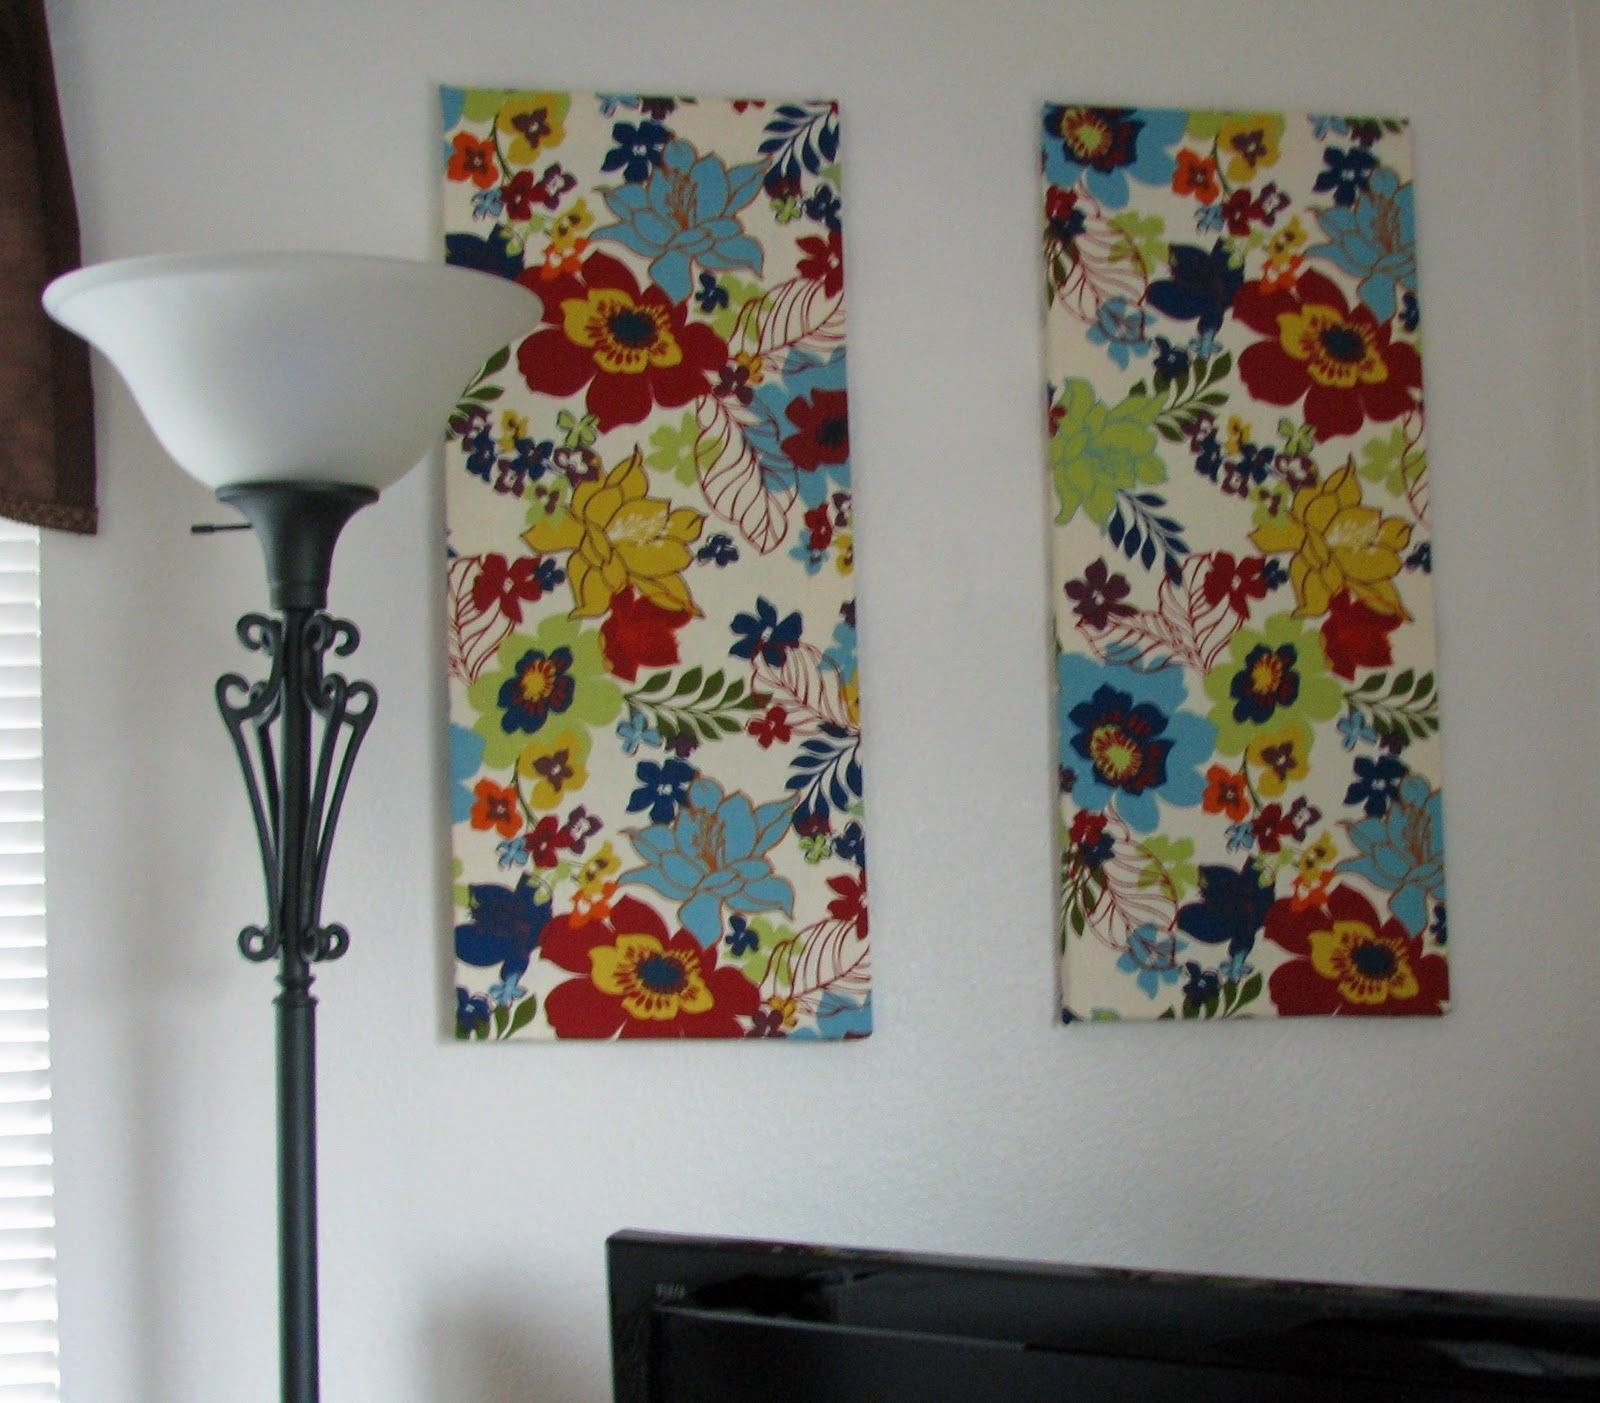 The Closet Domestic: Hiding White Walls: Fabric Wall Art For Recent Fabric Panels For Wall Art (View 9 of 15)